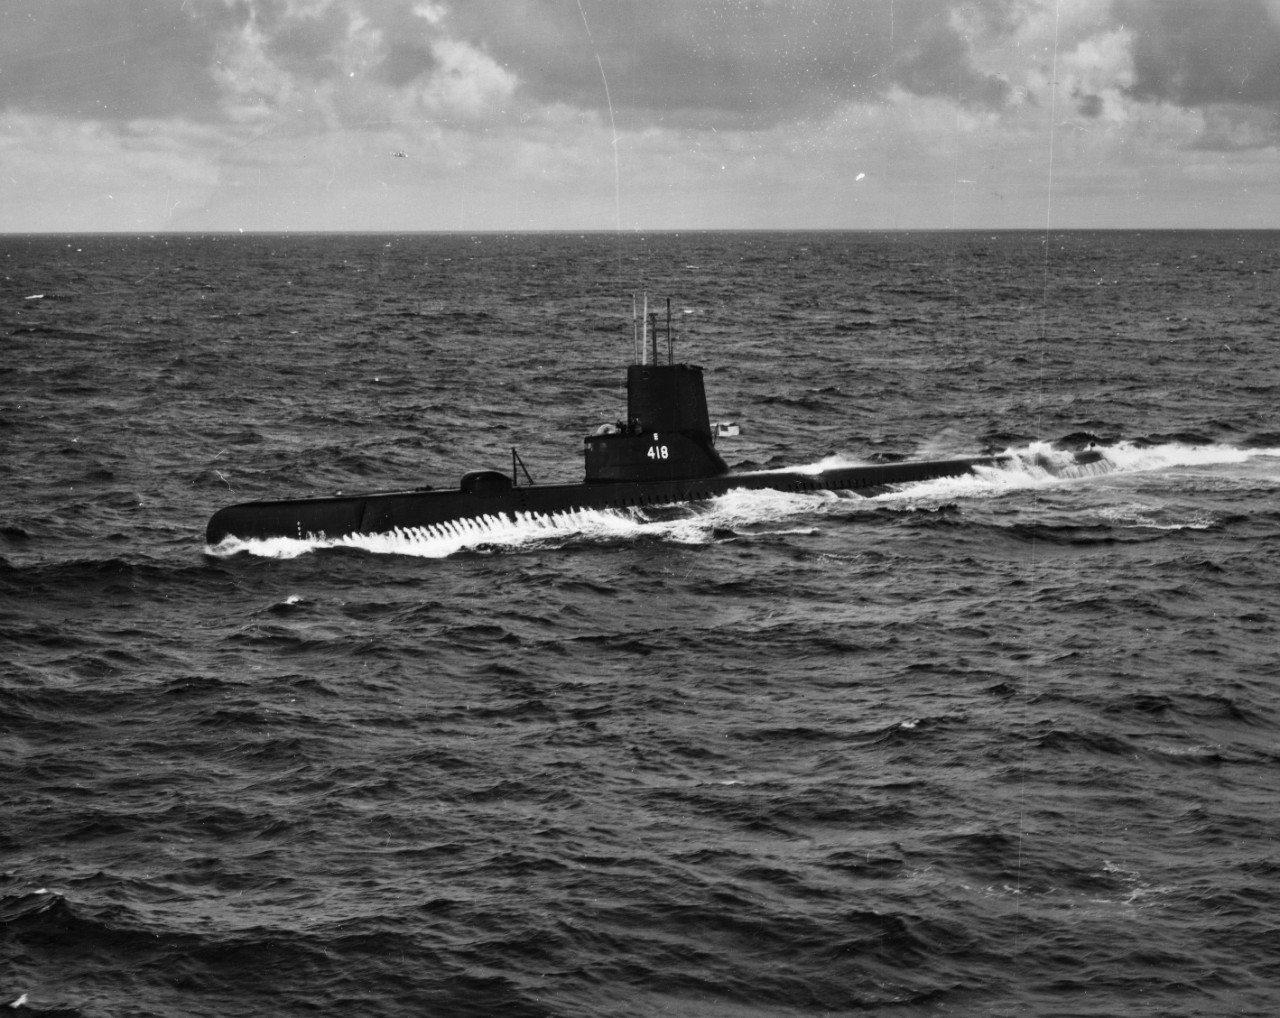 Aerial view of submarine USS Thornback (SS-418) underway on the surface